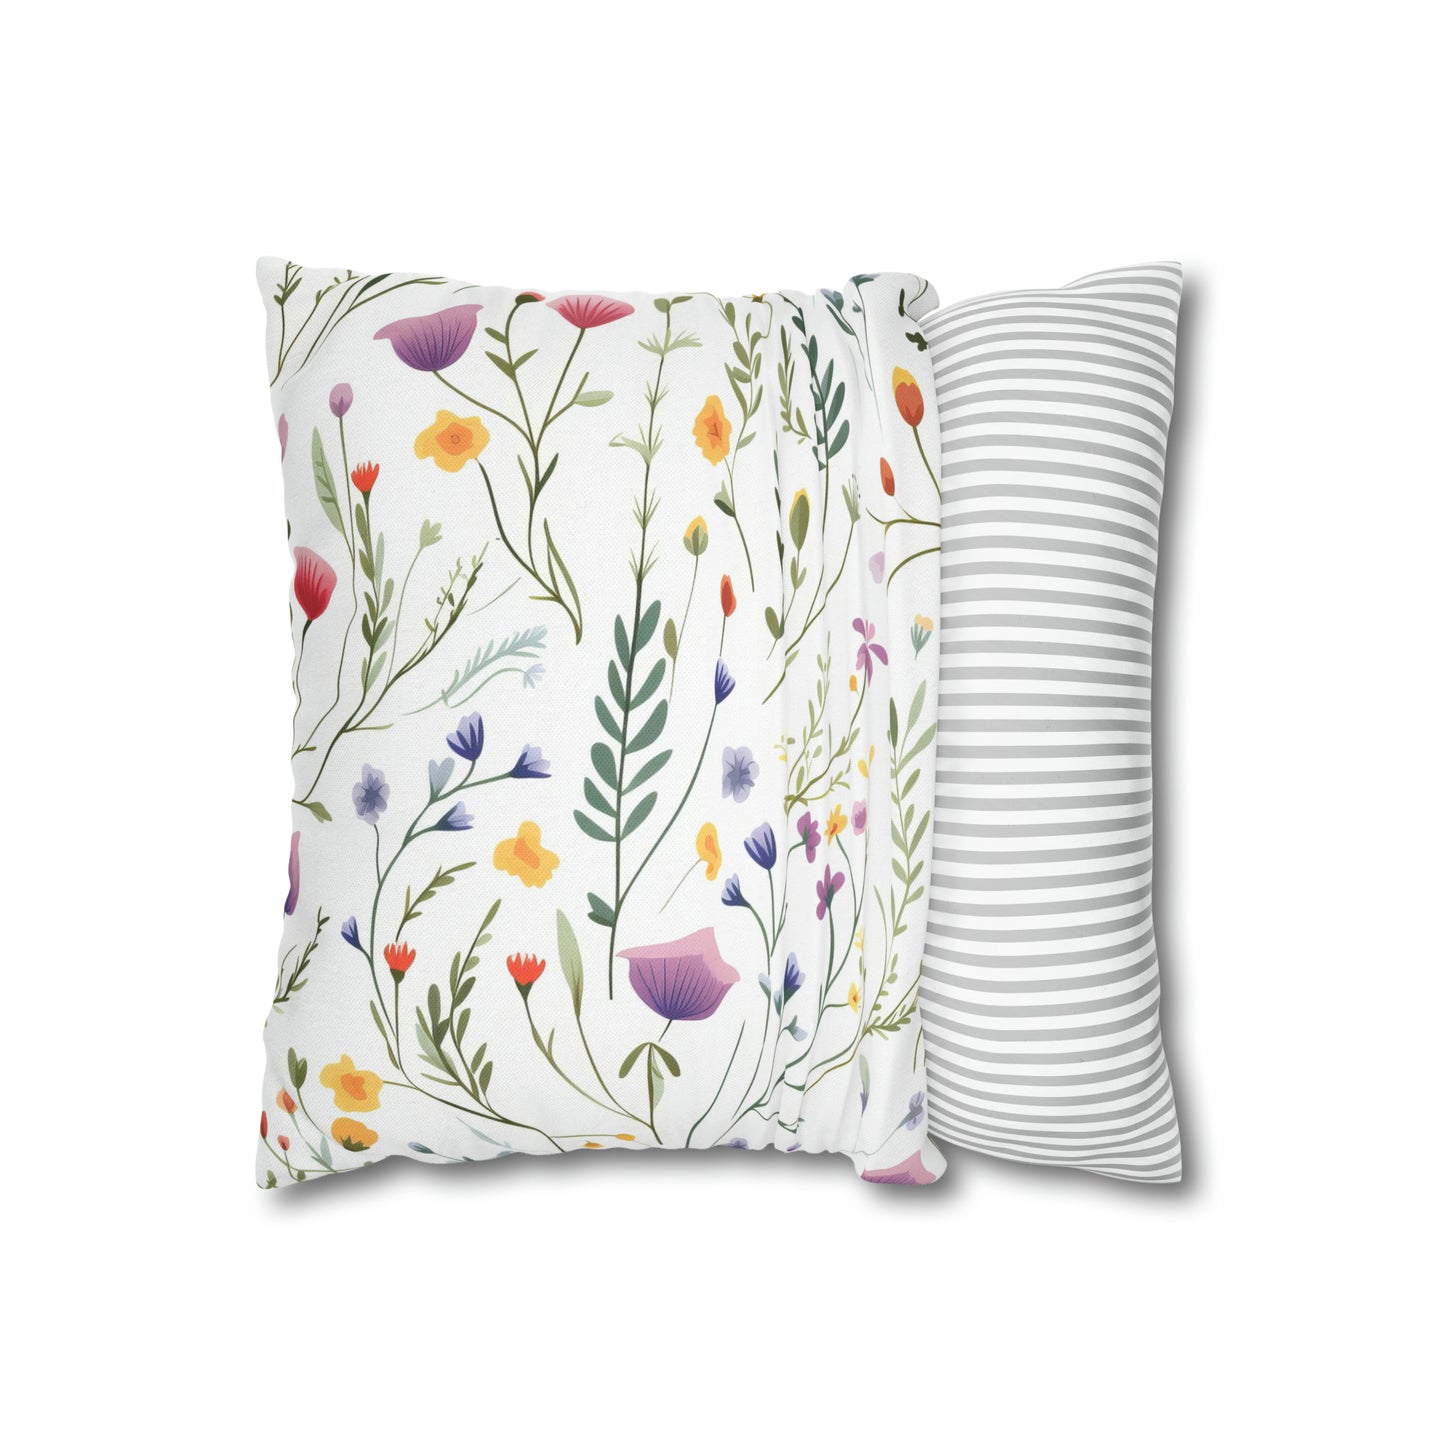 Dainty Wildflowers Square Pillow Case